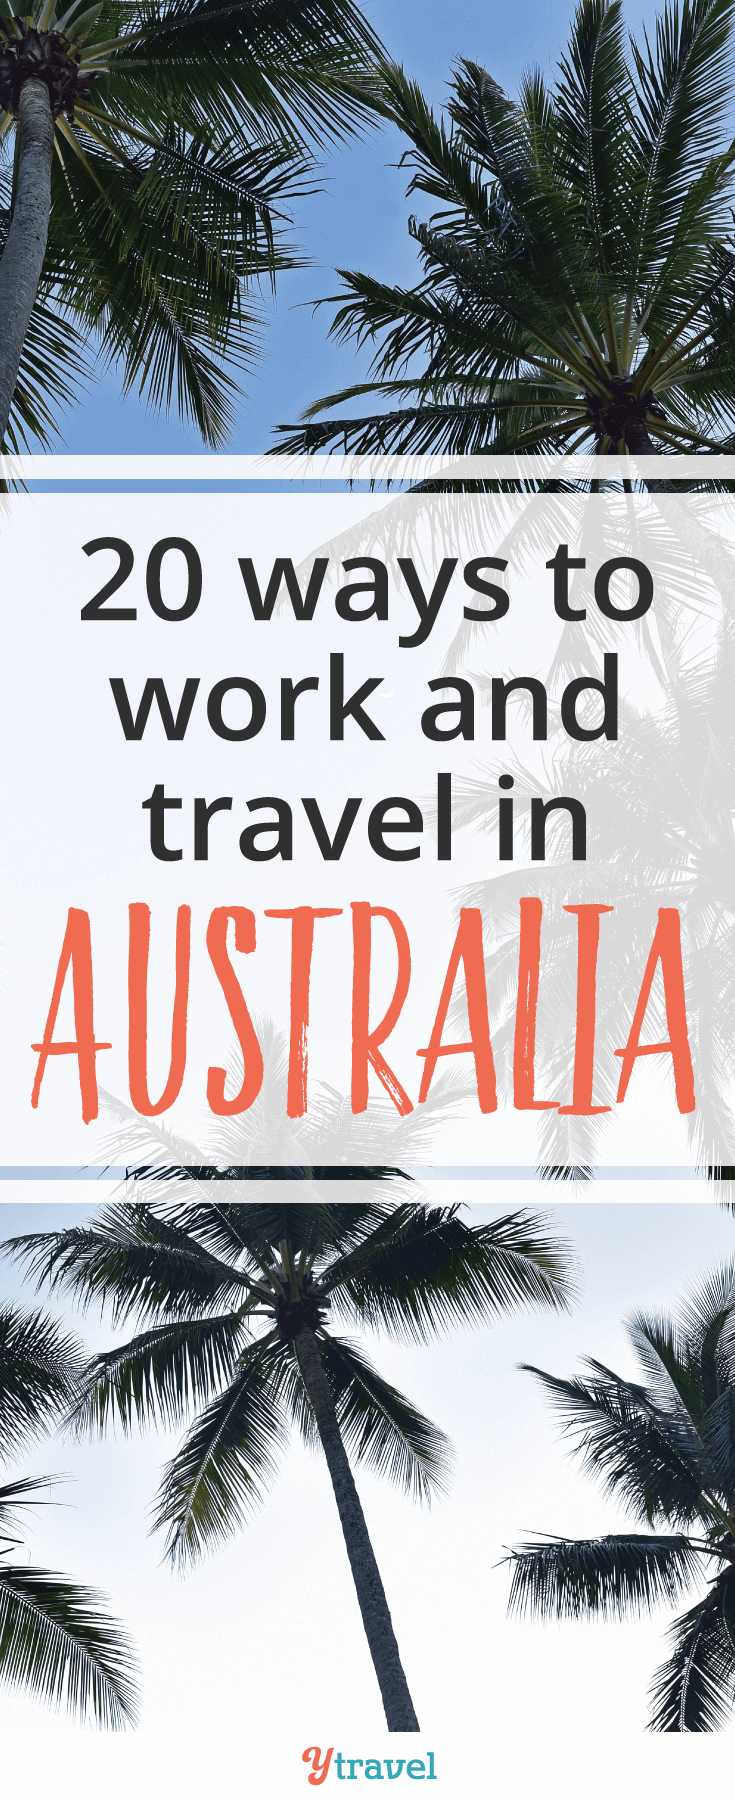 Traveling in Australia can be hard on the pocketbook. We've come up with 20 ways to work and travel in Australia that can help turn your travel dreams into reality.